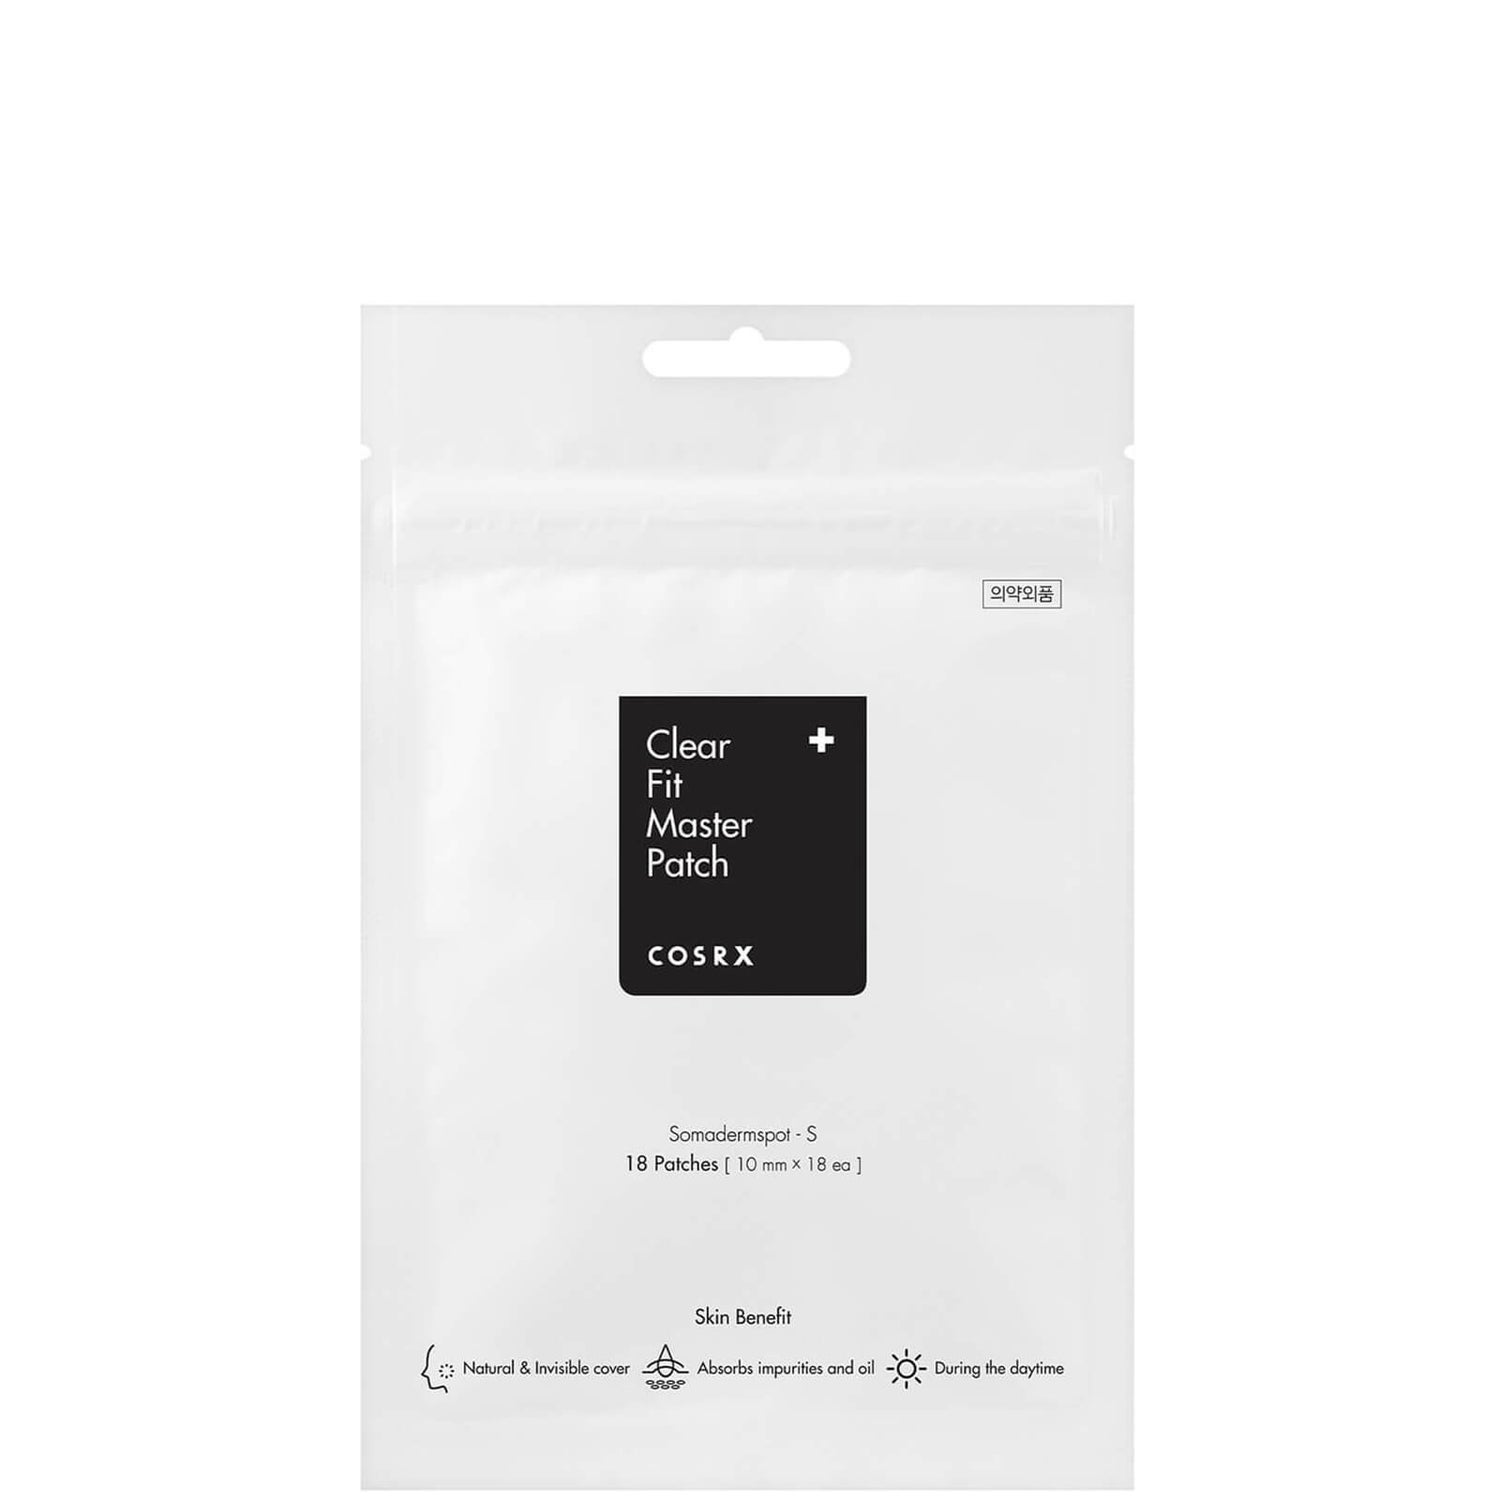 COSRX Clear Fit Master Patch (1 piece)